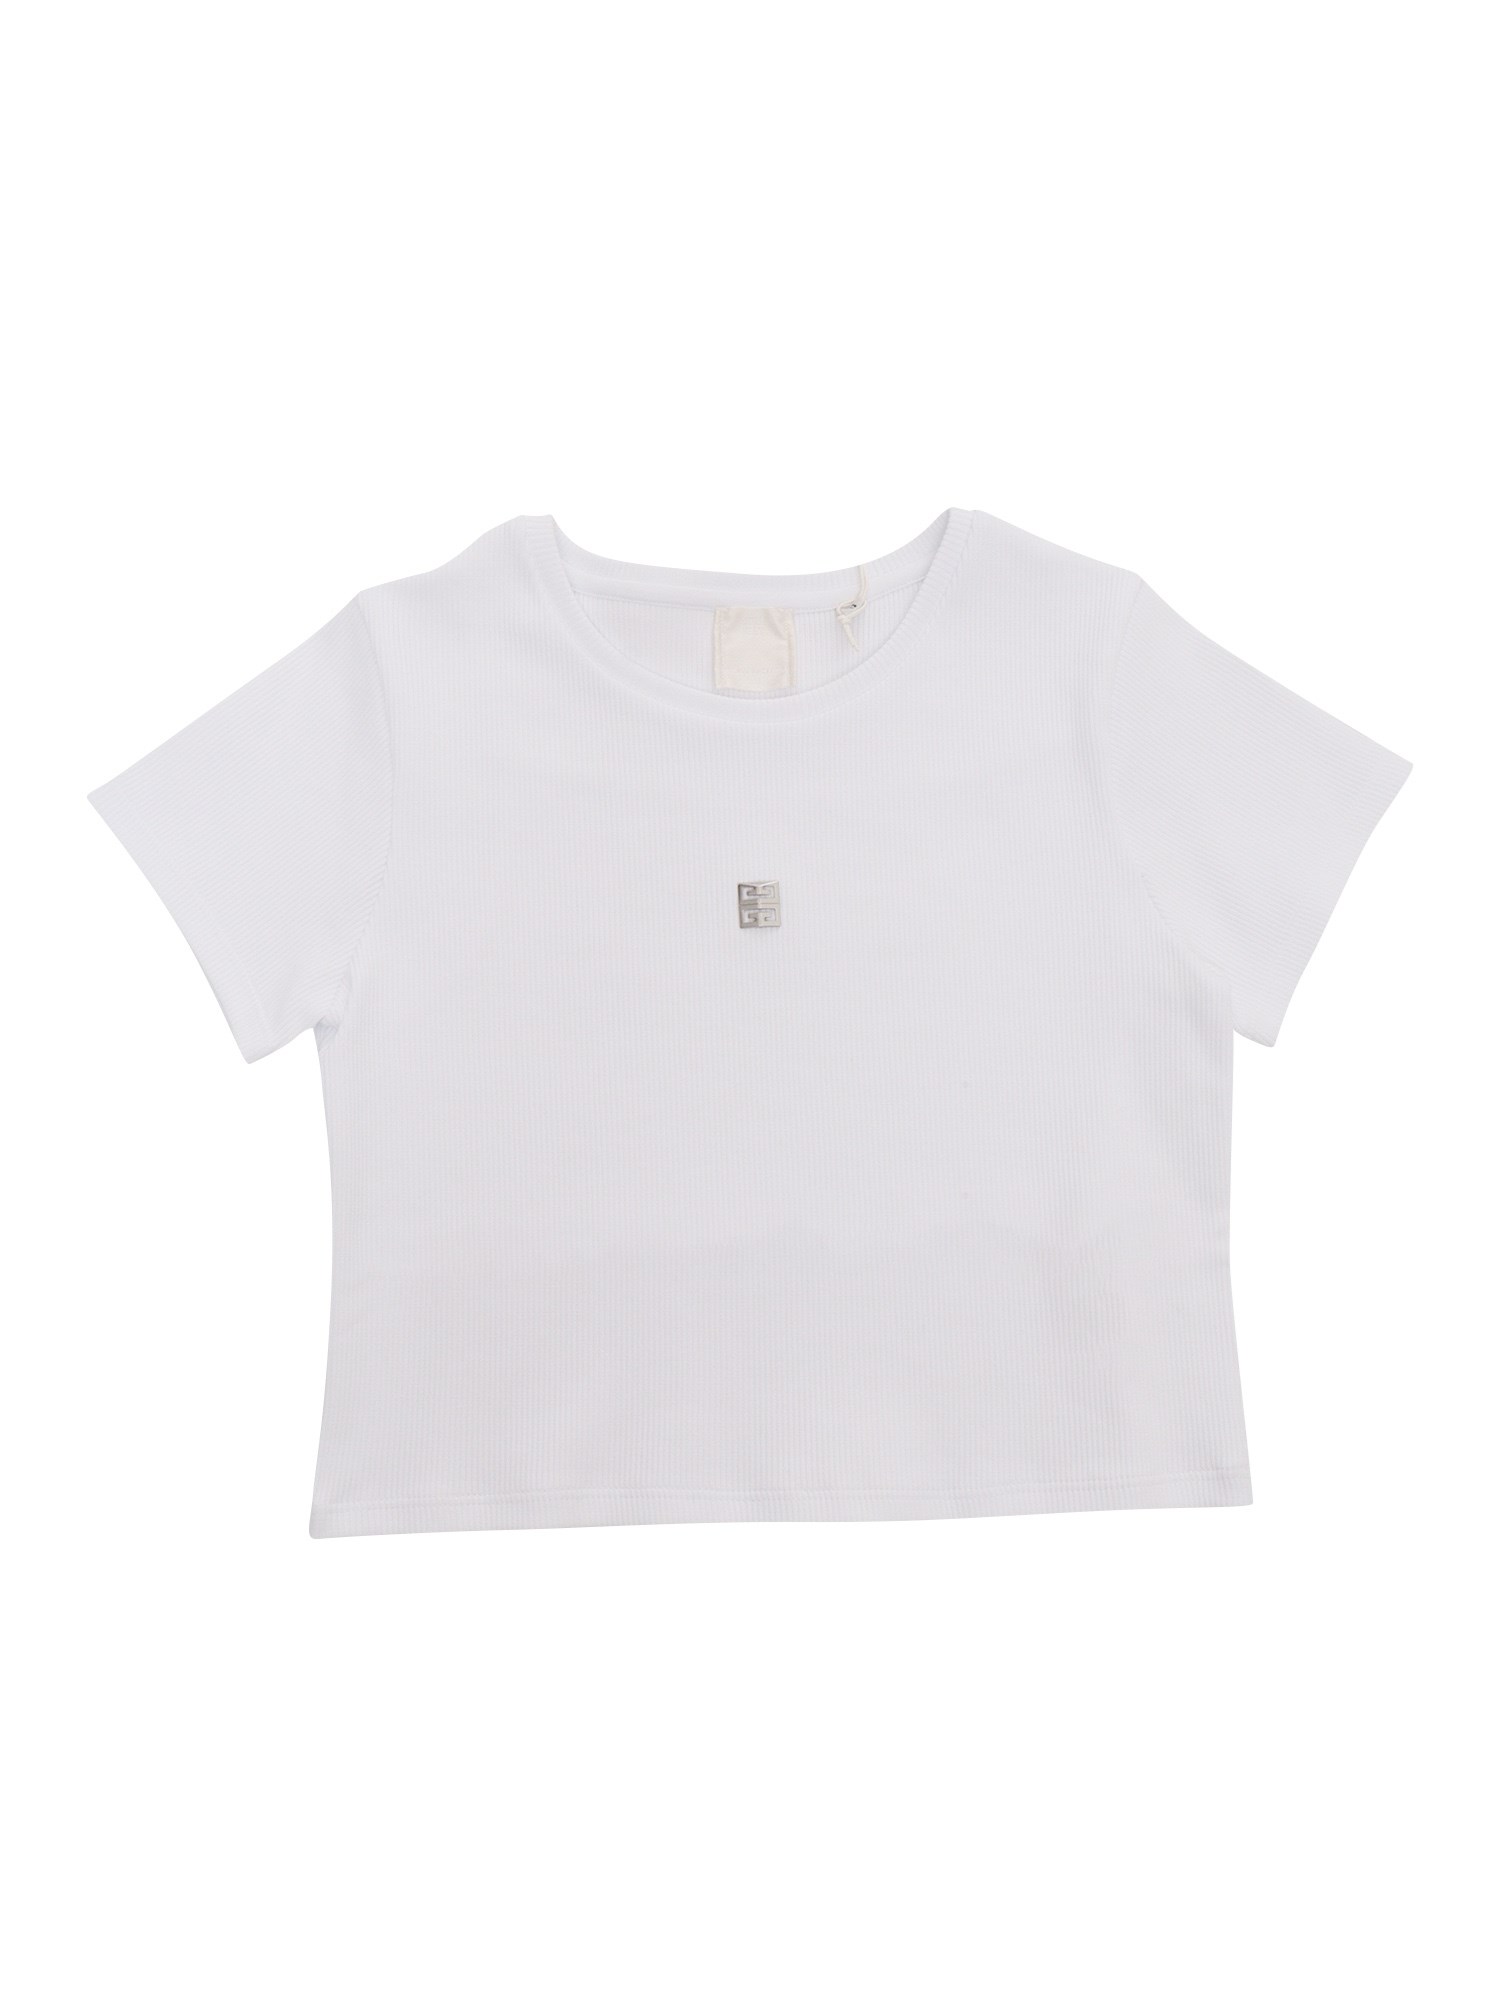 Givenchy White Cropped T-shirt